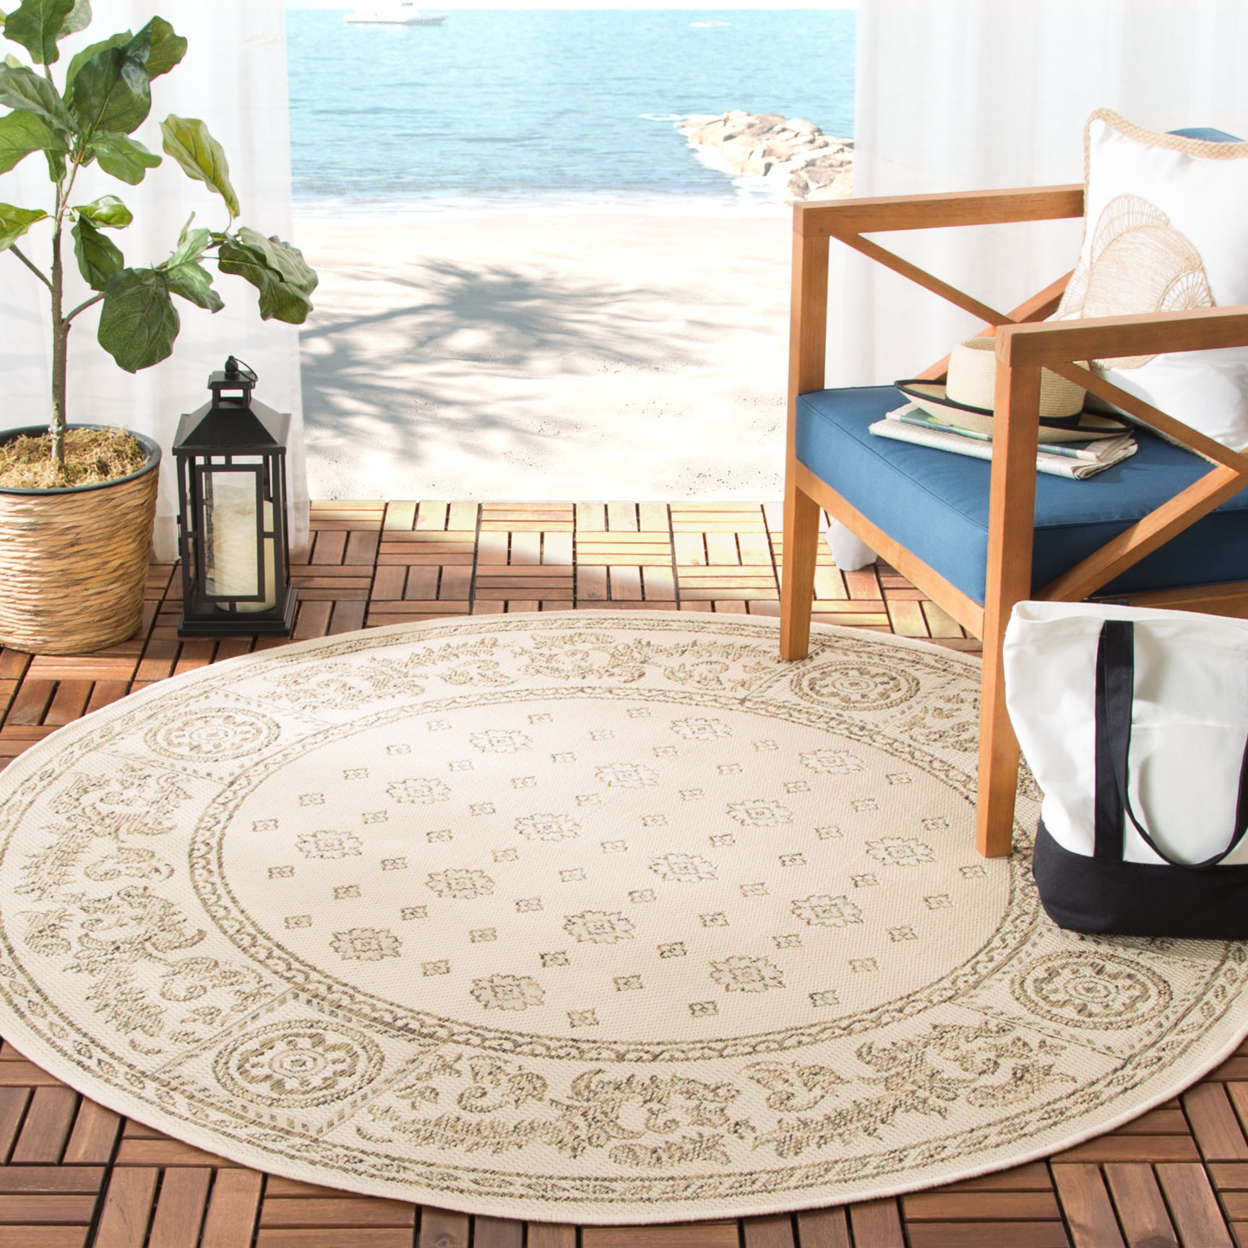 SAFAVIEH Outdoor CY1356-3001 Courtyard Natural / Brown Rug - 8' X 11'